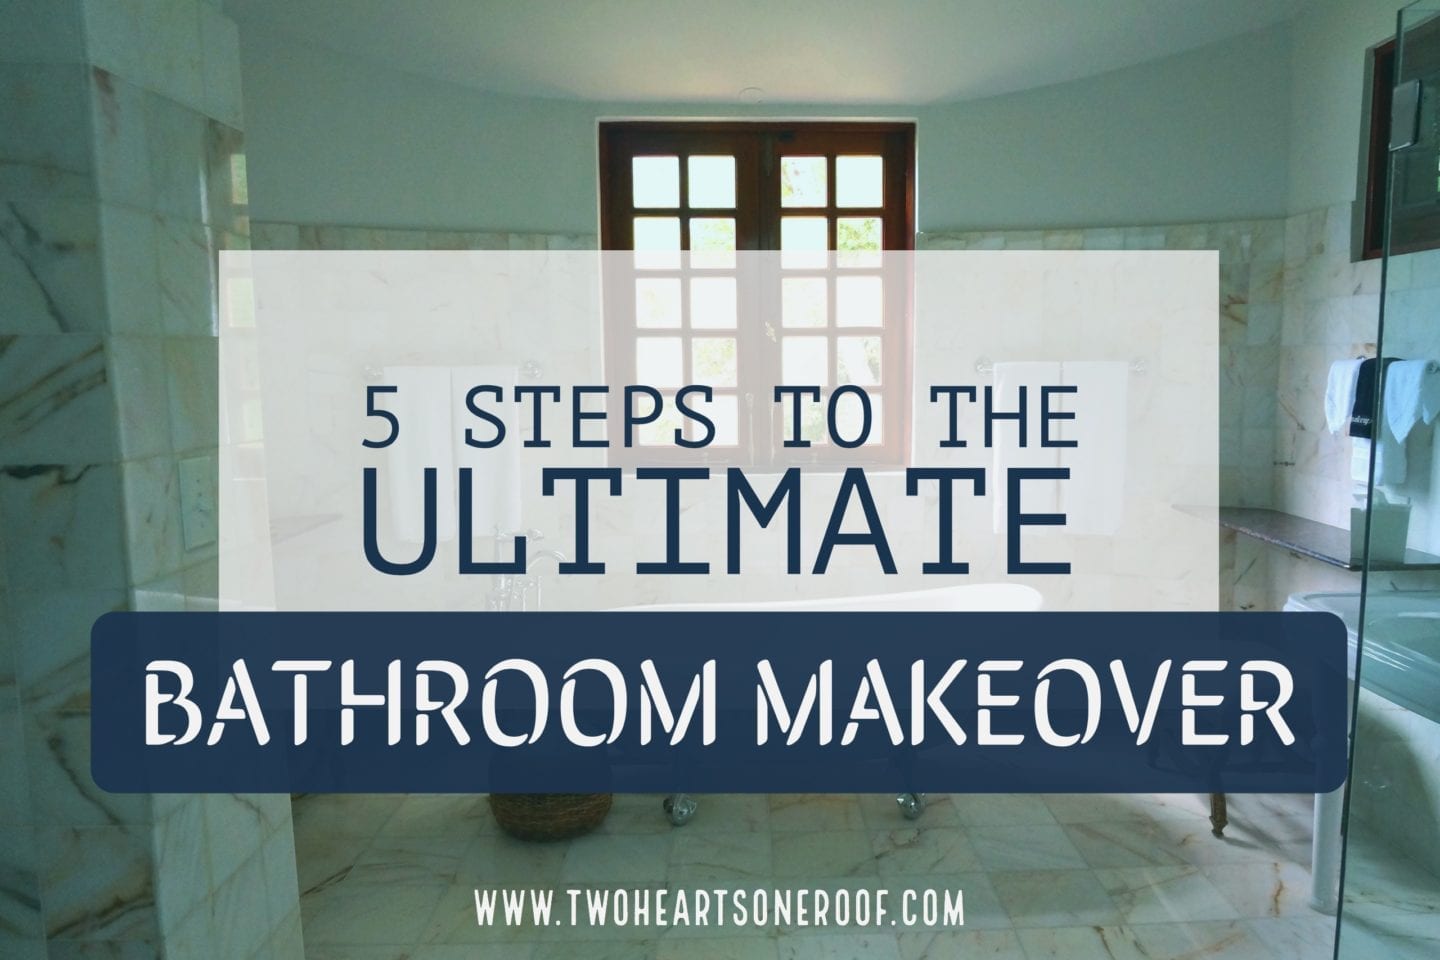 5 steps to the ultimate bathroom makeover